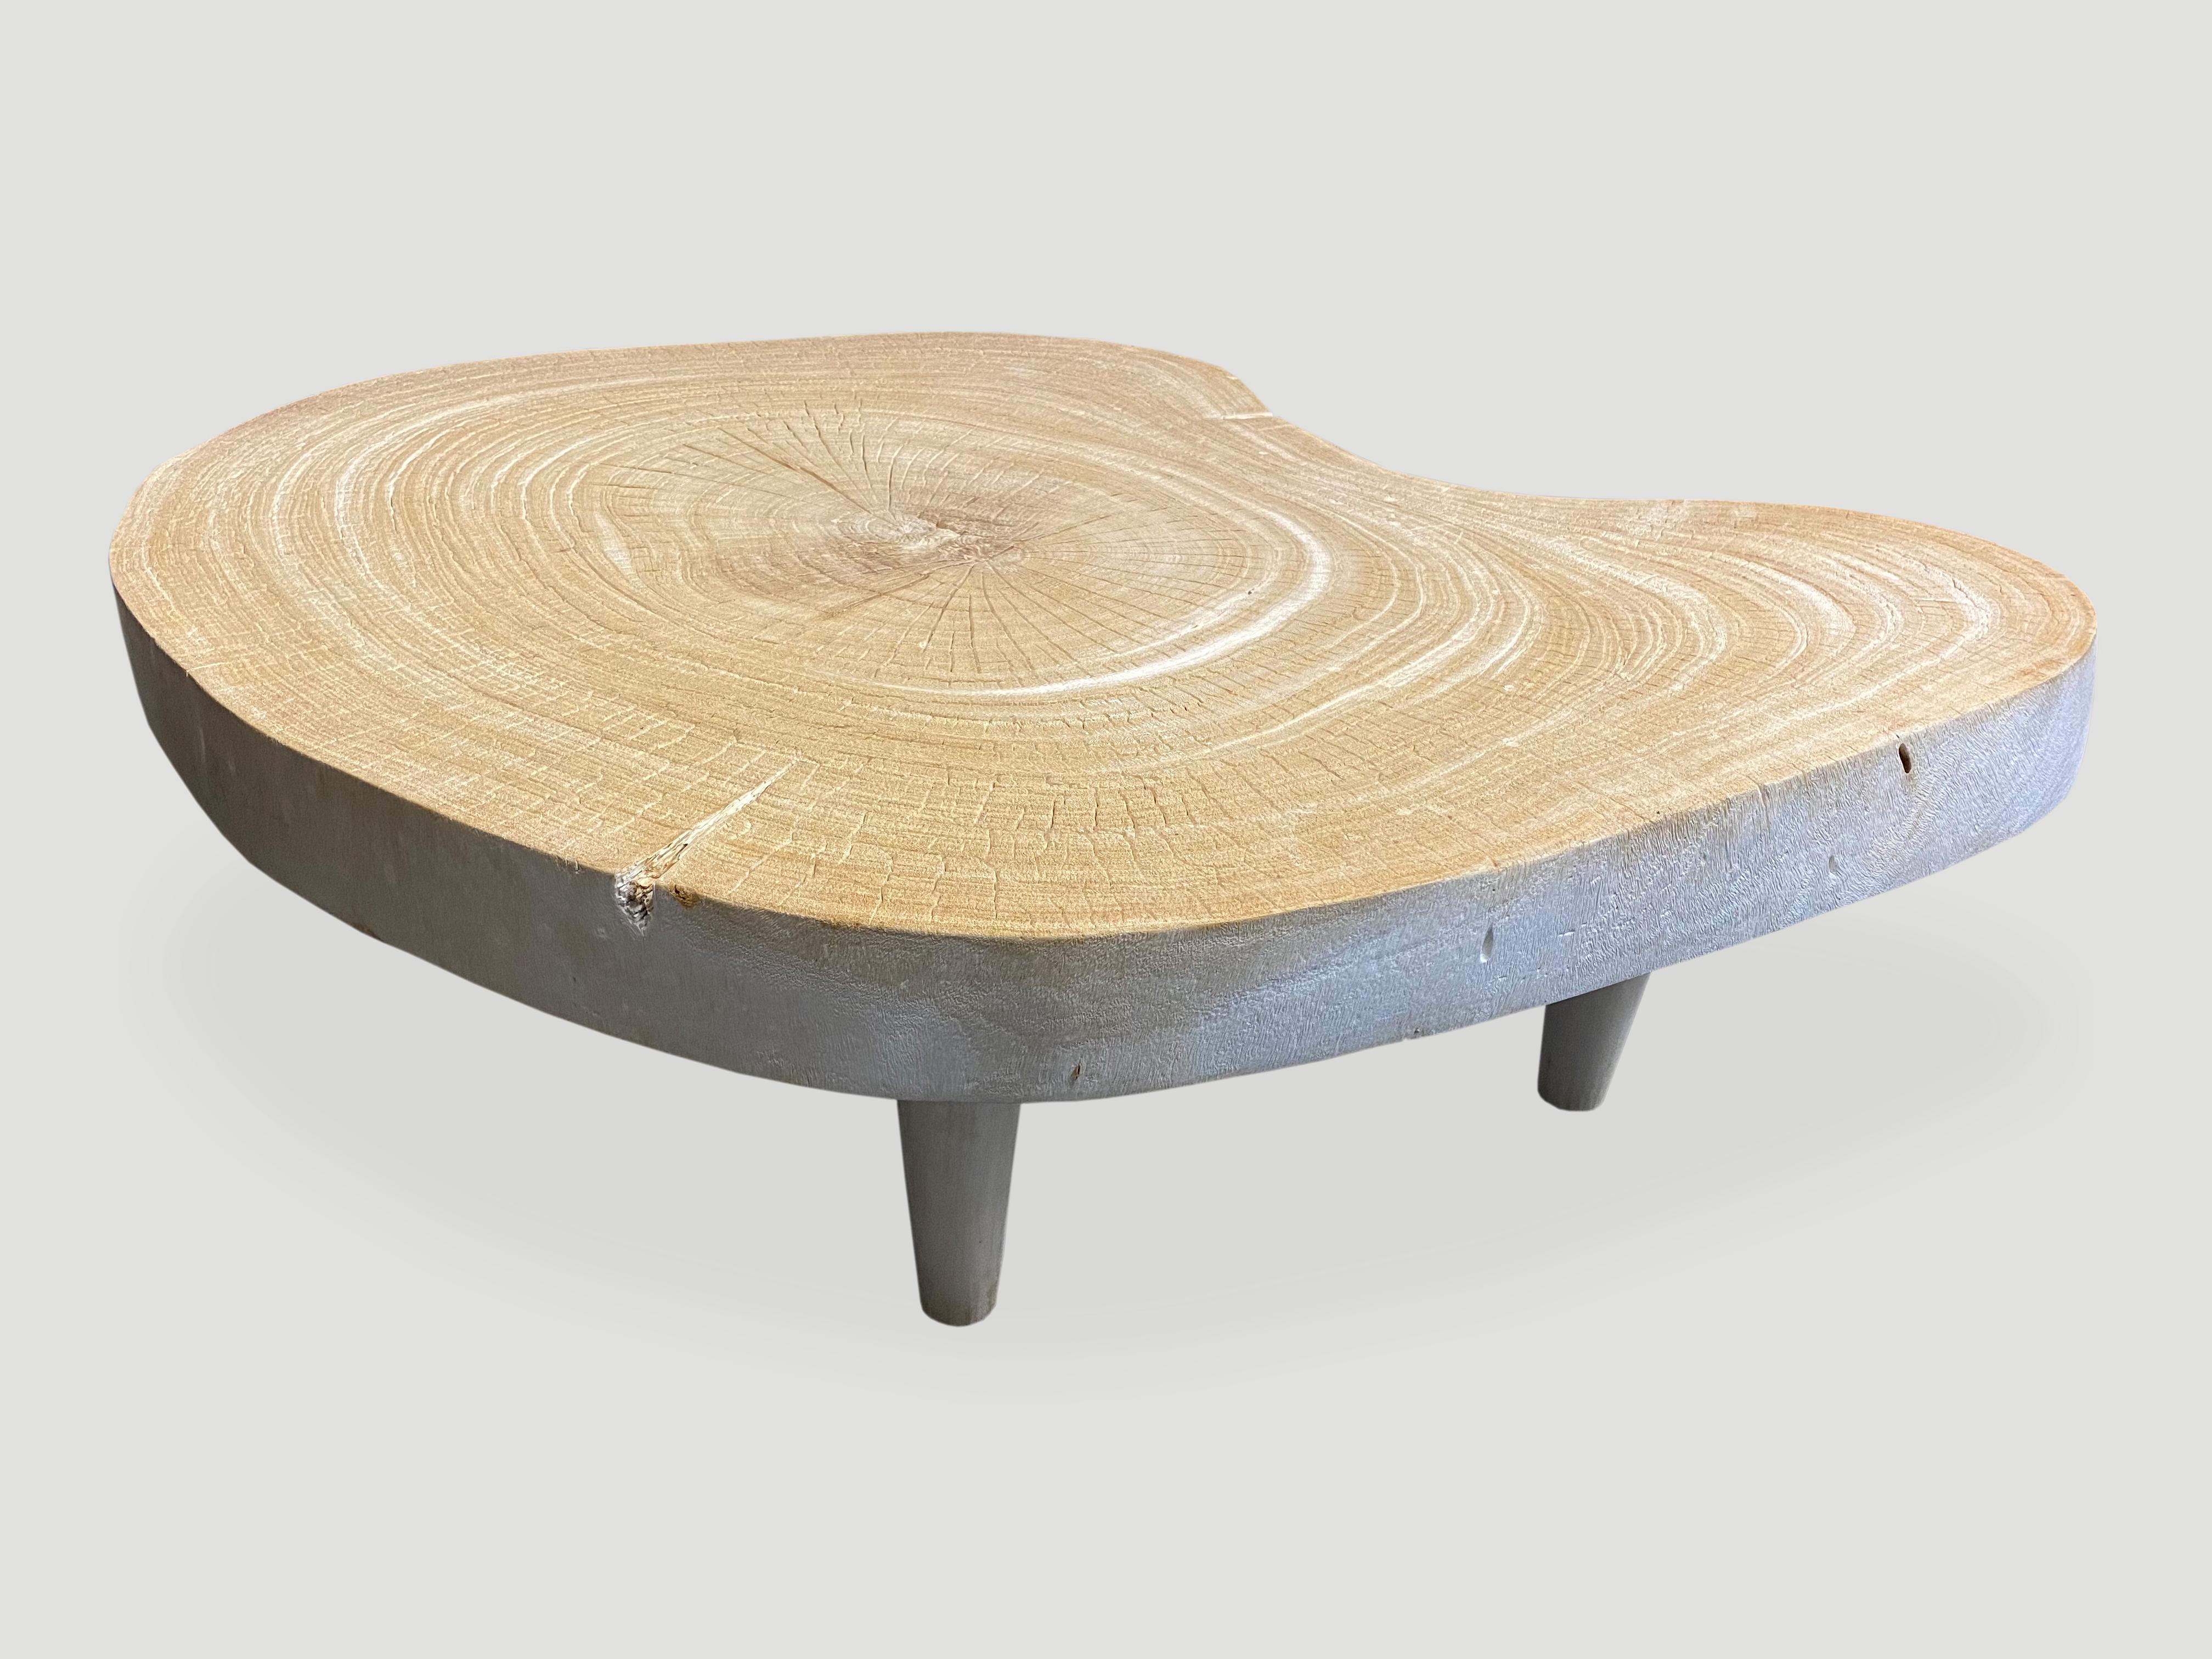 Impressive four inch slab coffee table, set on cone shaped mid century style legs. The wood is unknown though indigenous to Indonesia. We love the natural way it ‘crackled’ after we applied the bleach to the wood and left in the sun to turn this